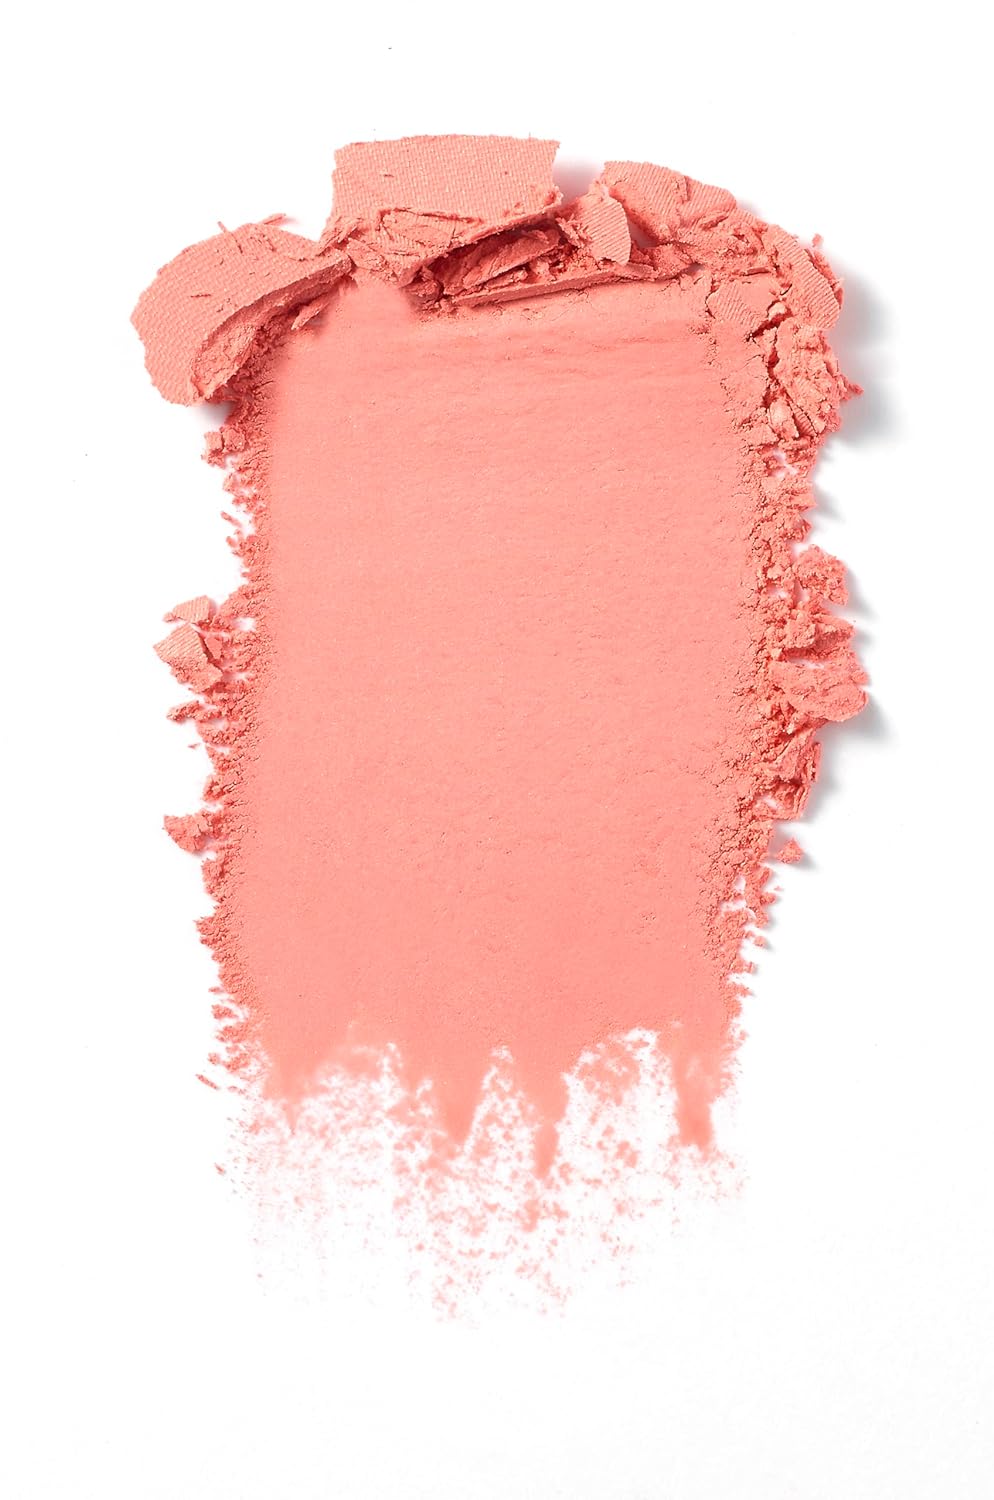 LILYBYRED Luv Beam Cheek - 01 Loveable Coral